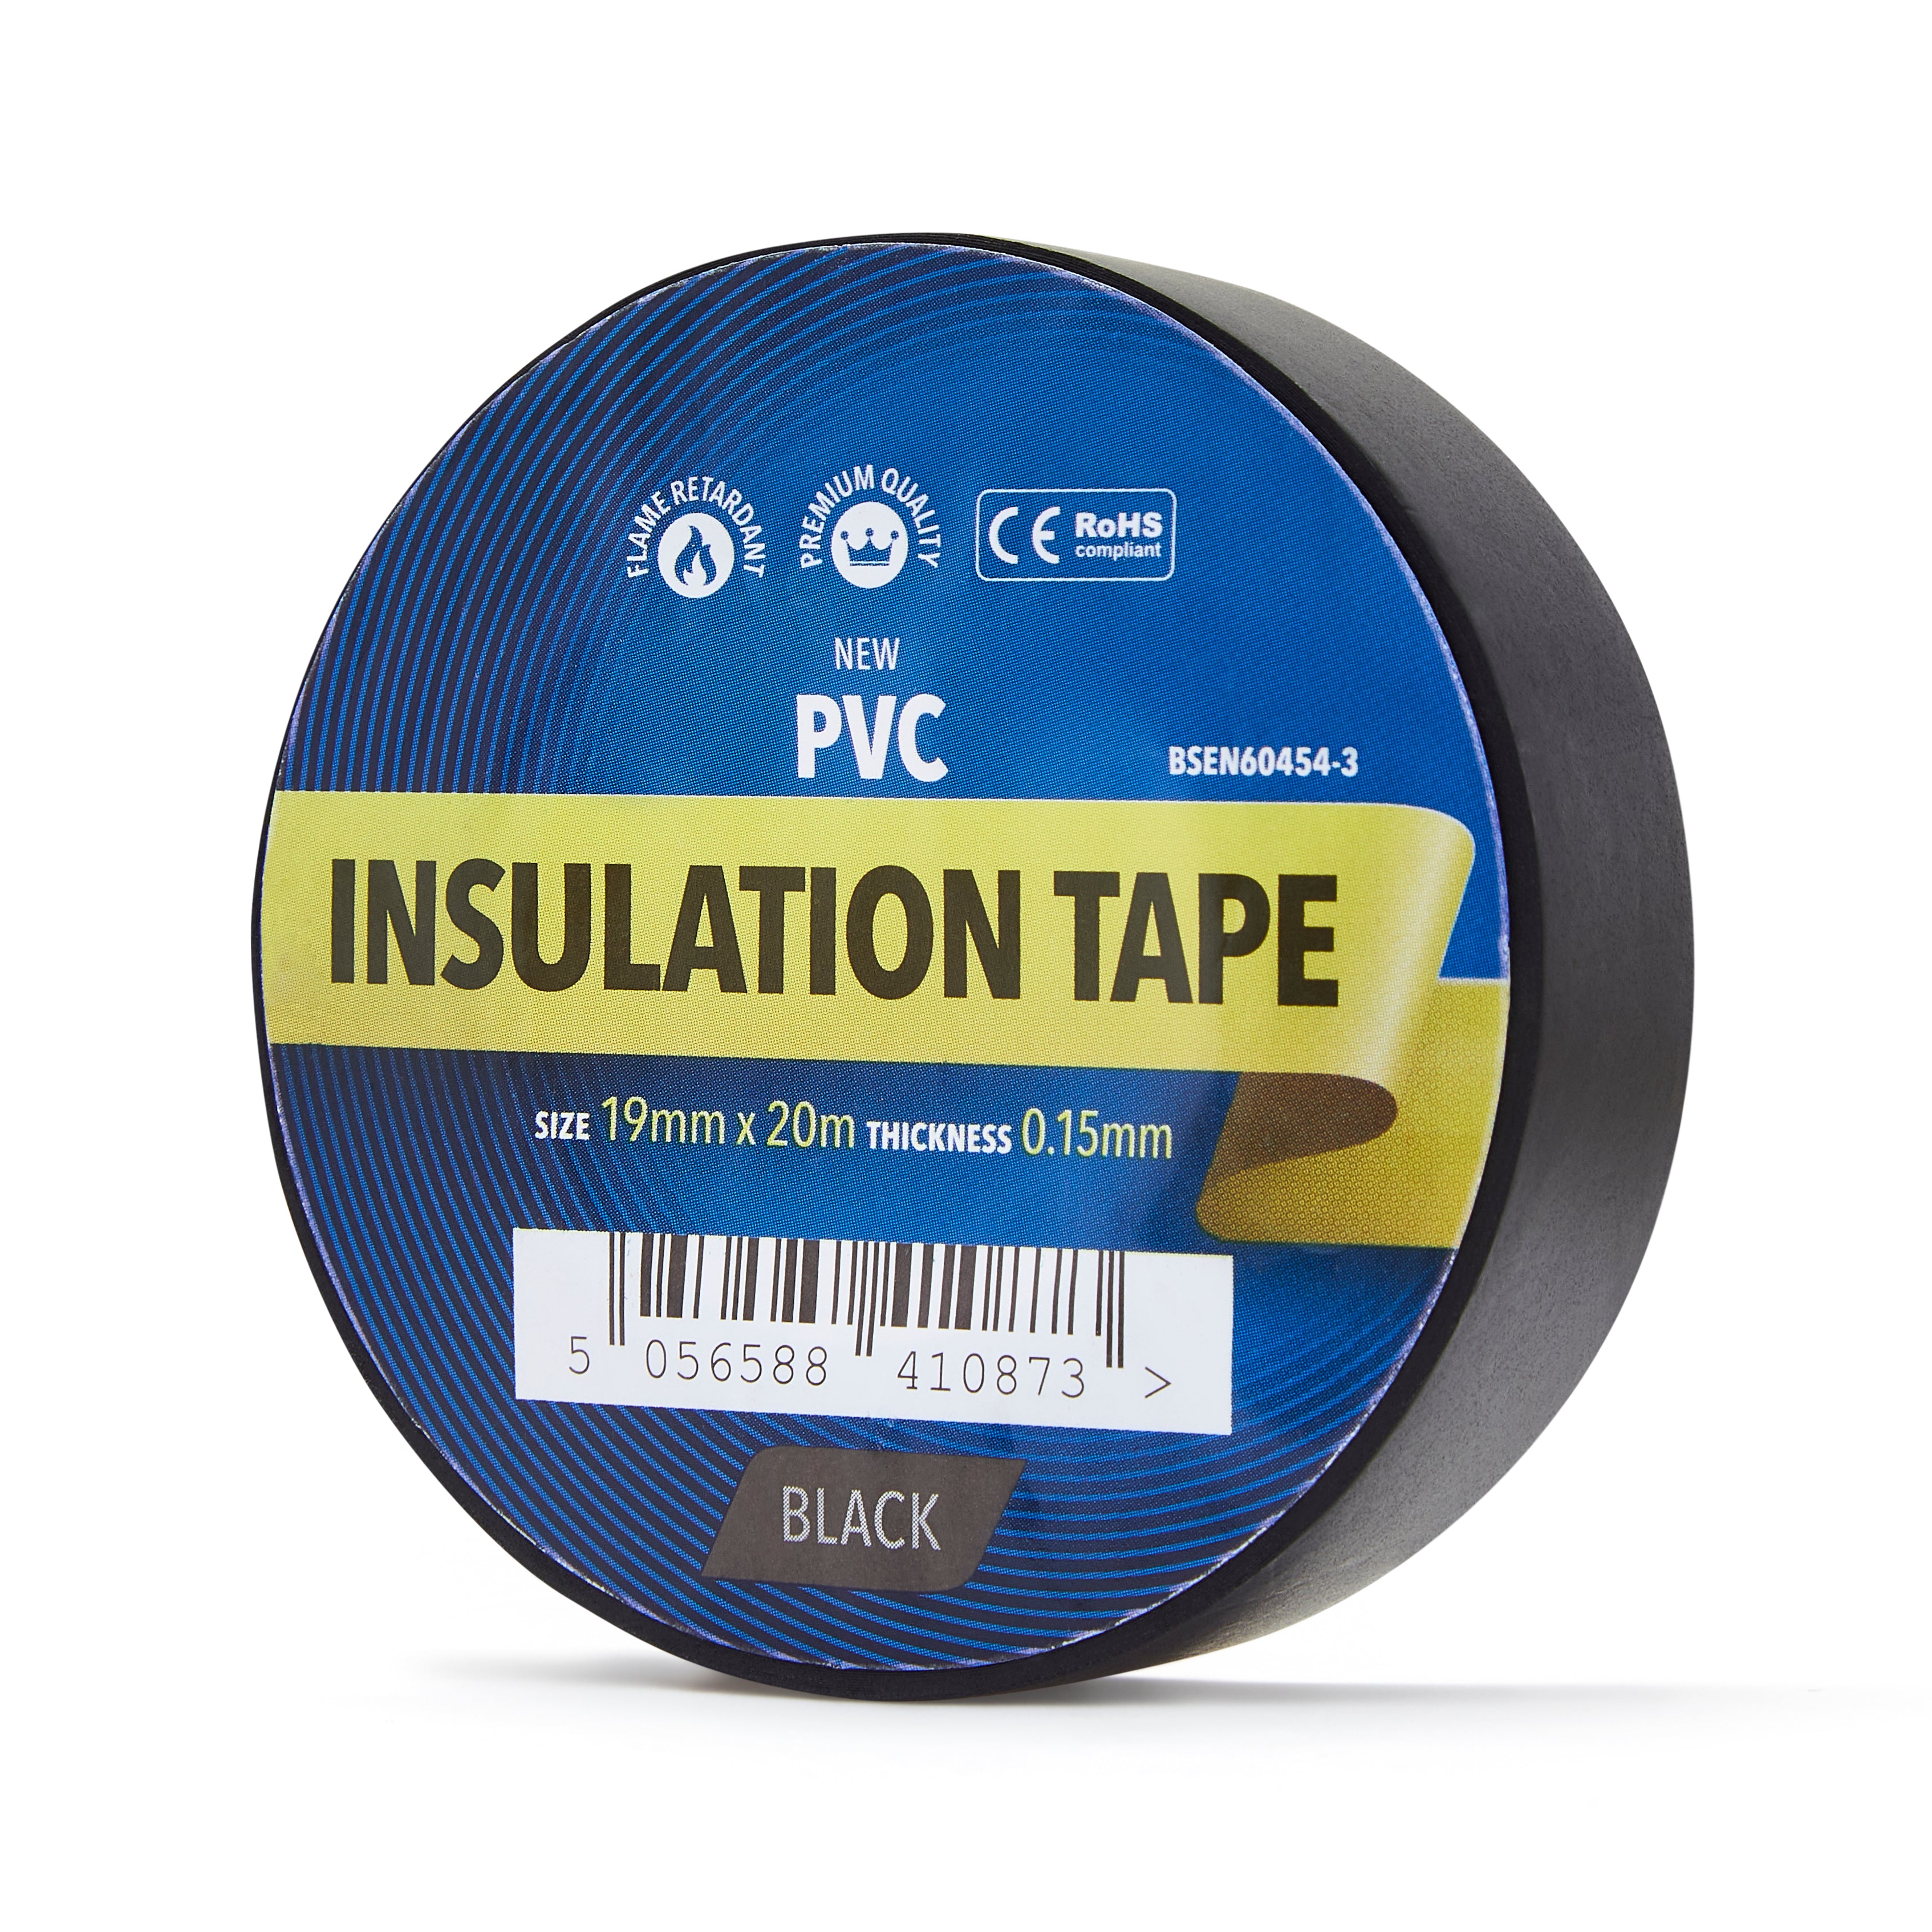 Black Electrical Tape 19mm - PVC Insulation Tape